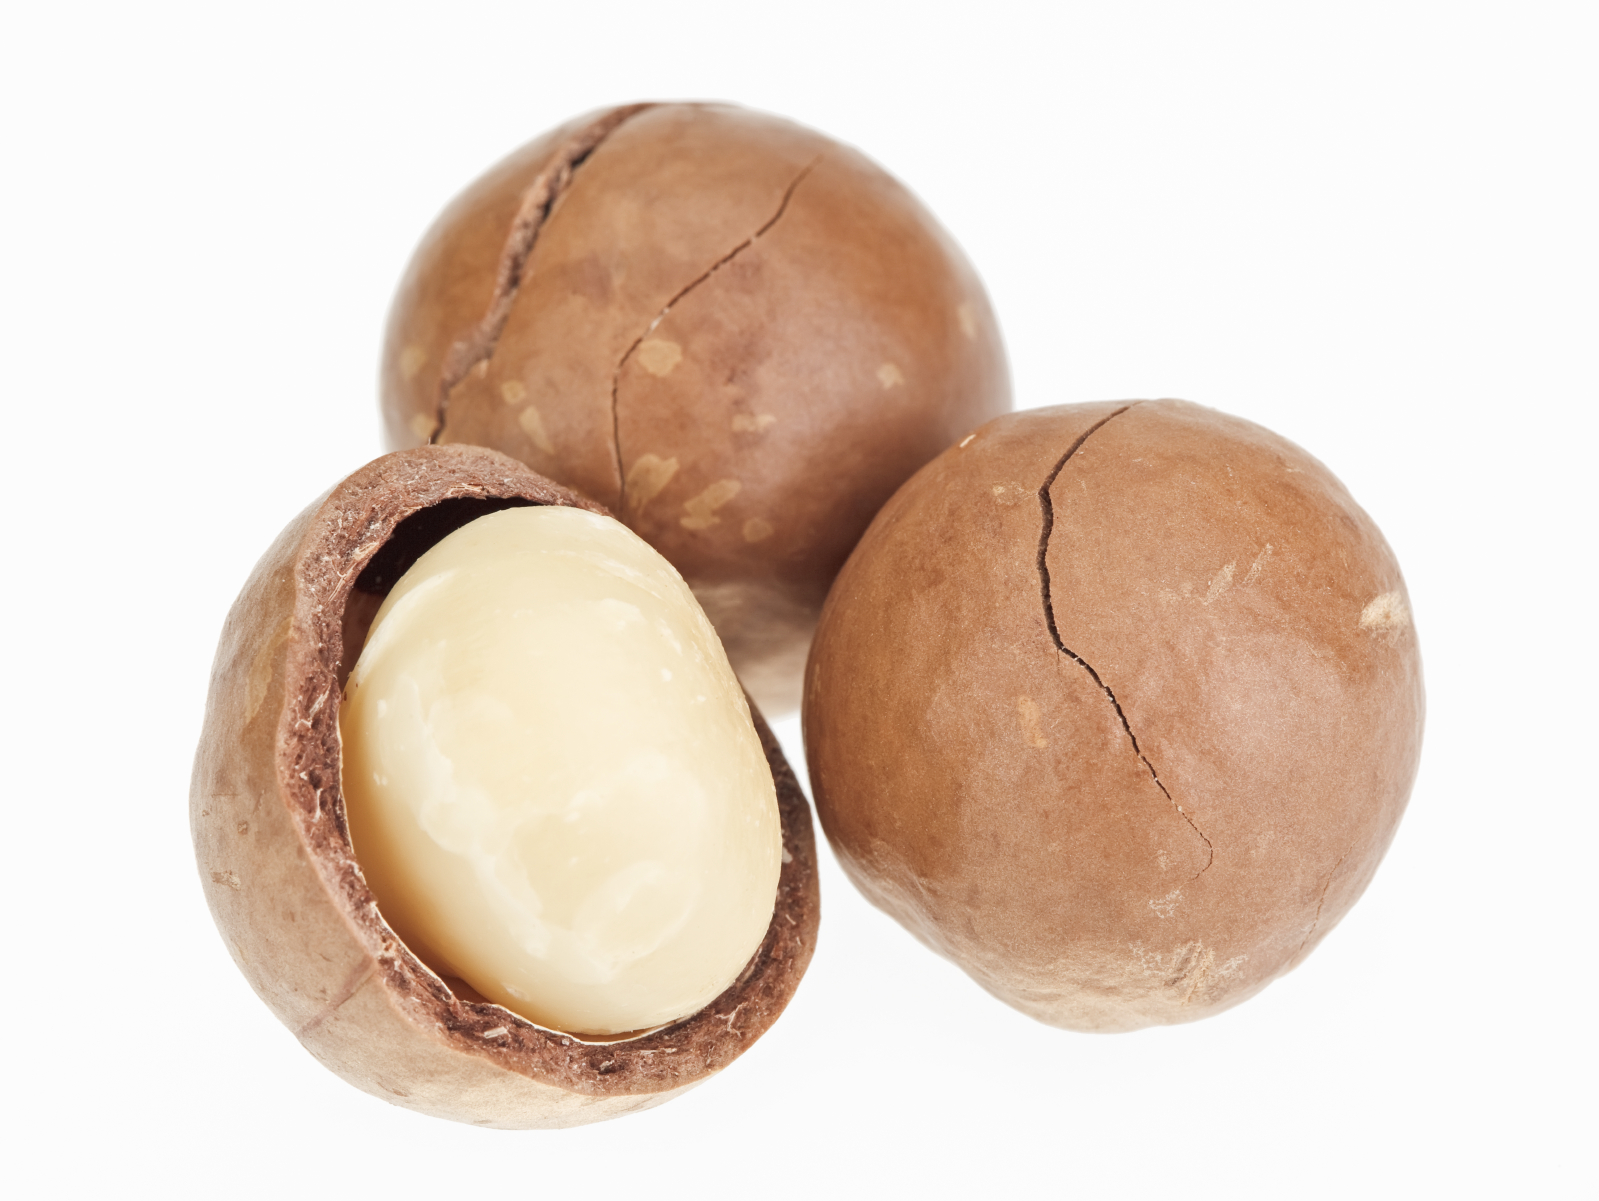 Shelled and unshelled macadamia nuts